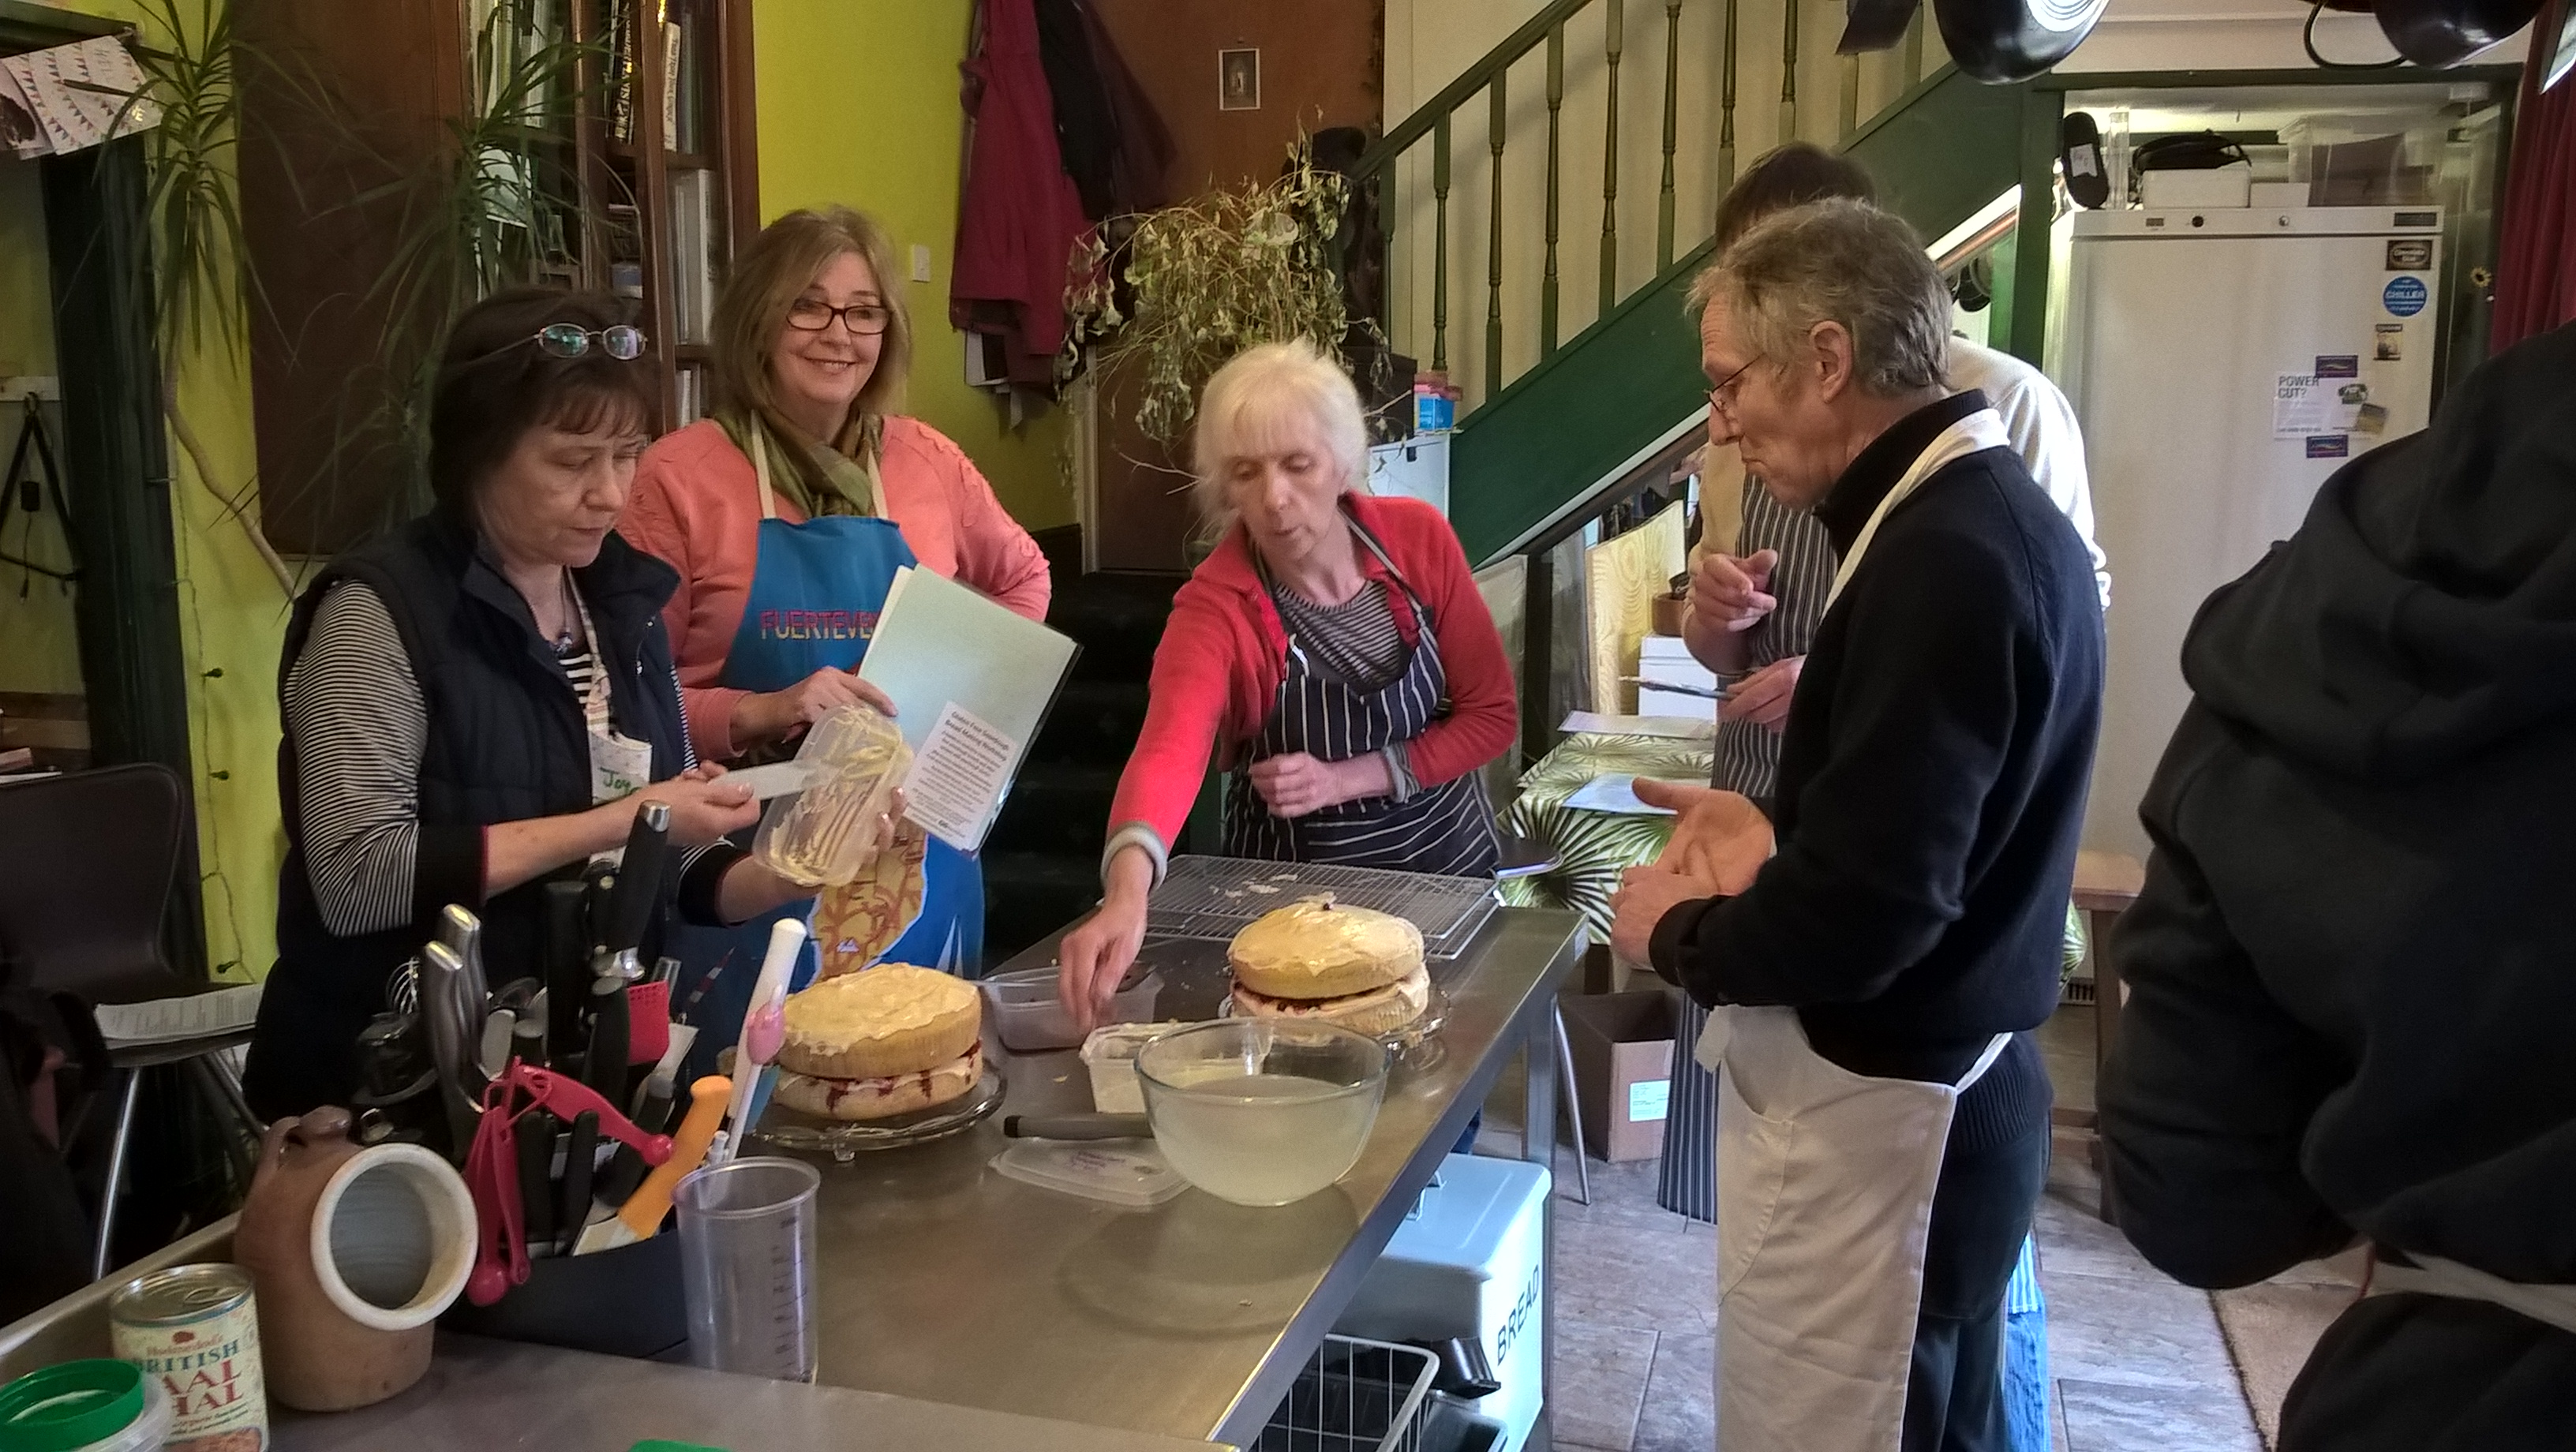 Vegan cookery weekend at Over the Rainbow